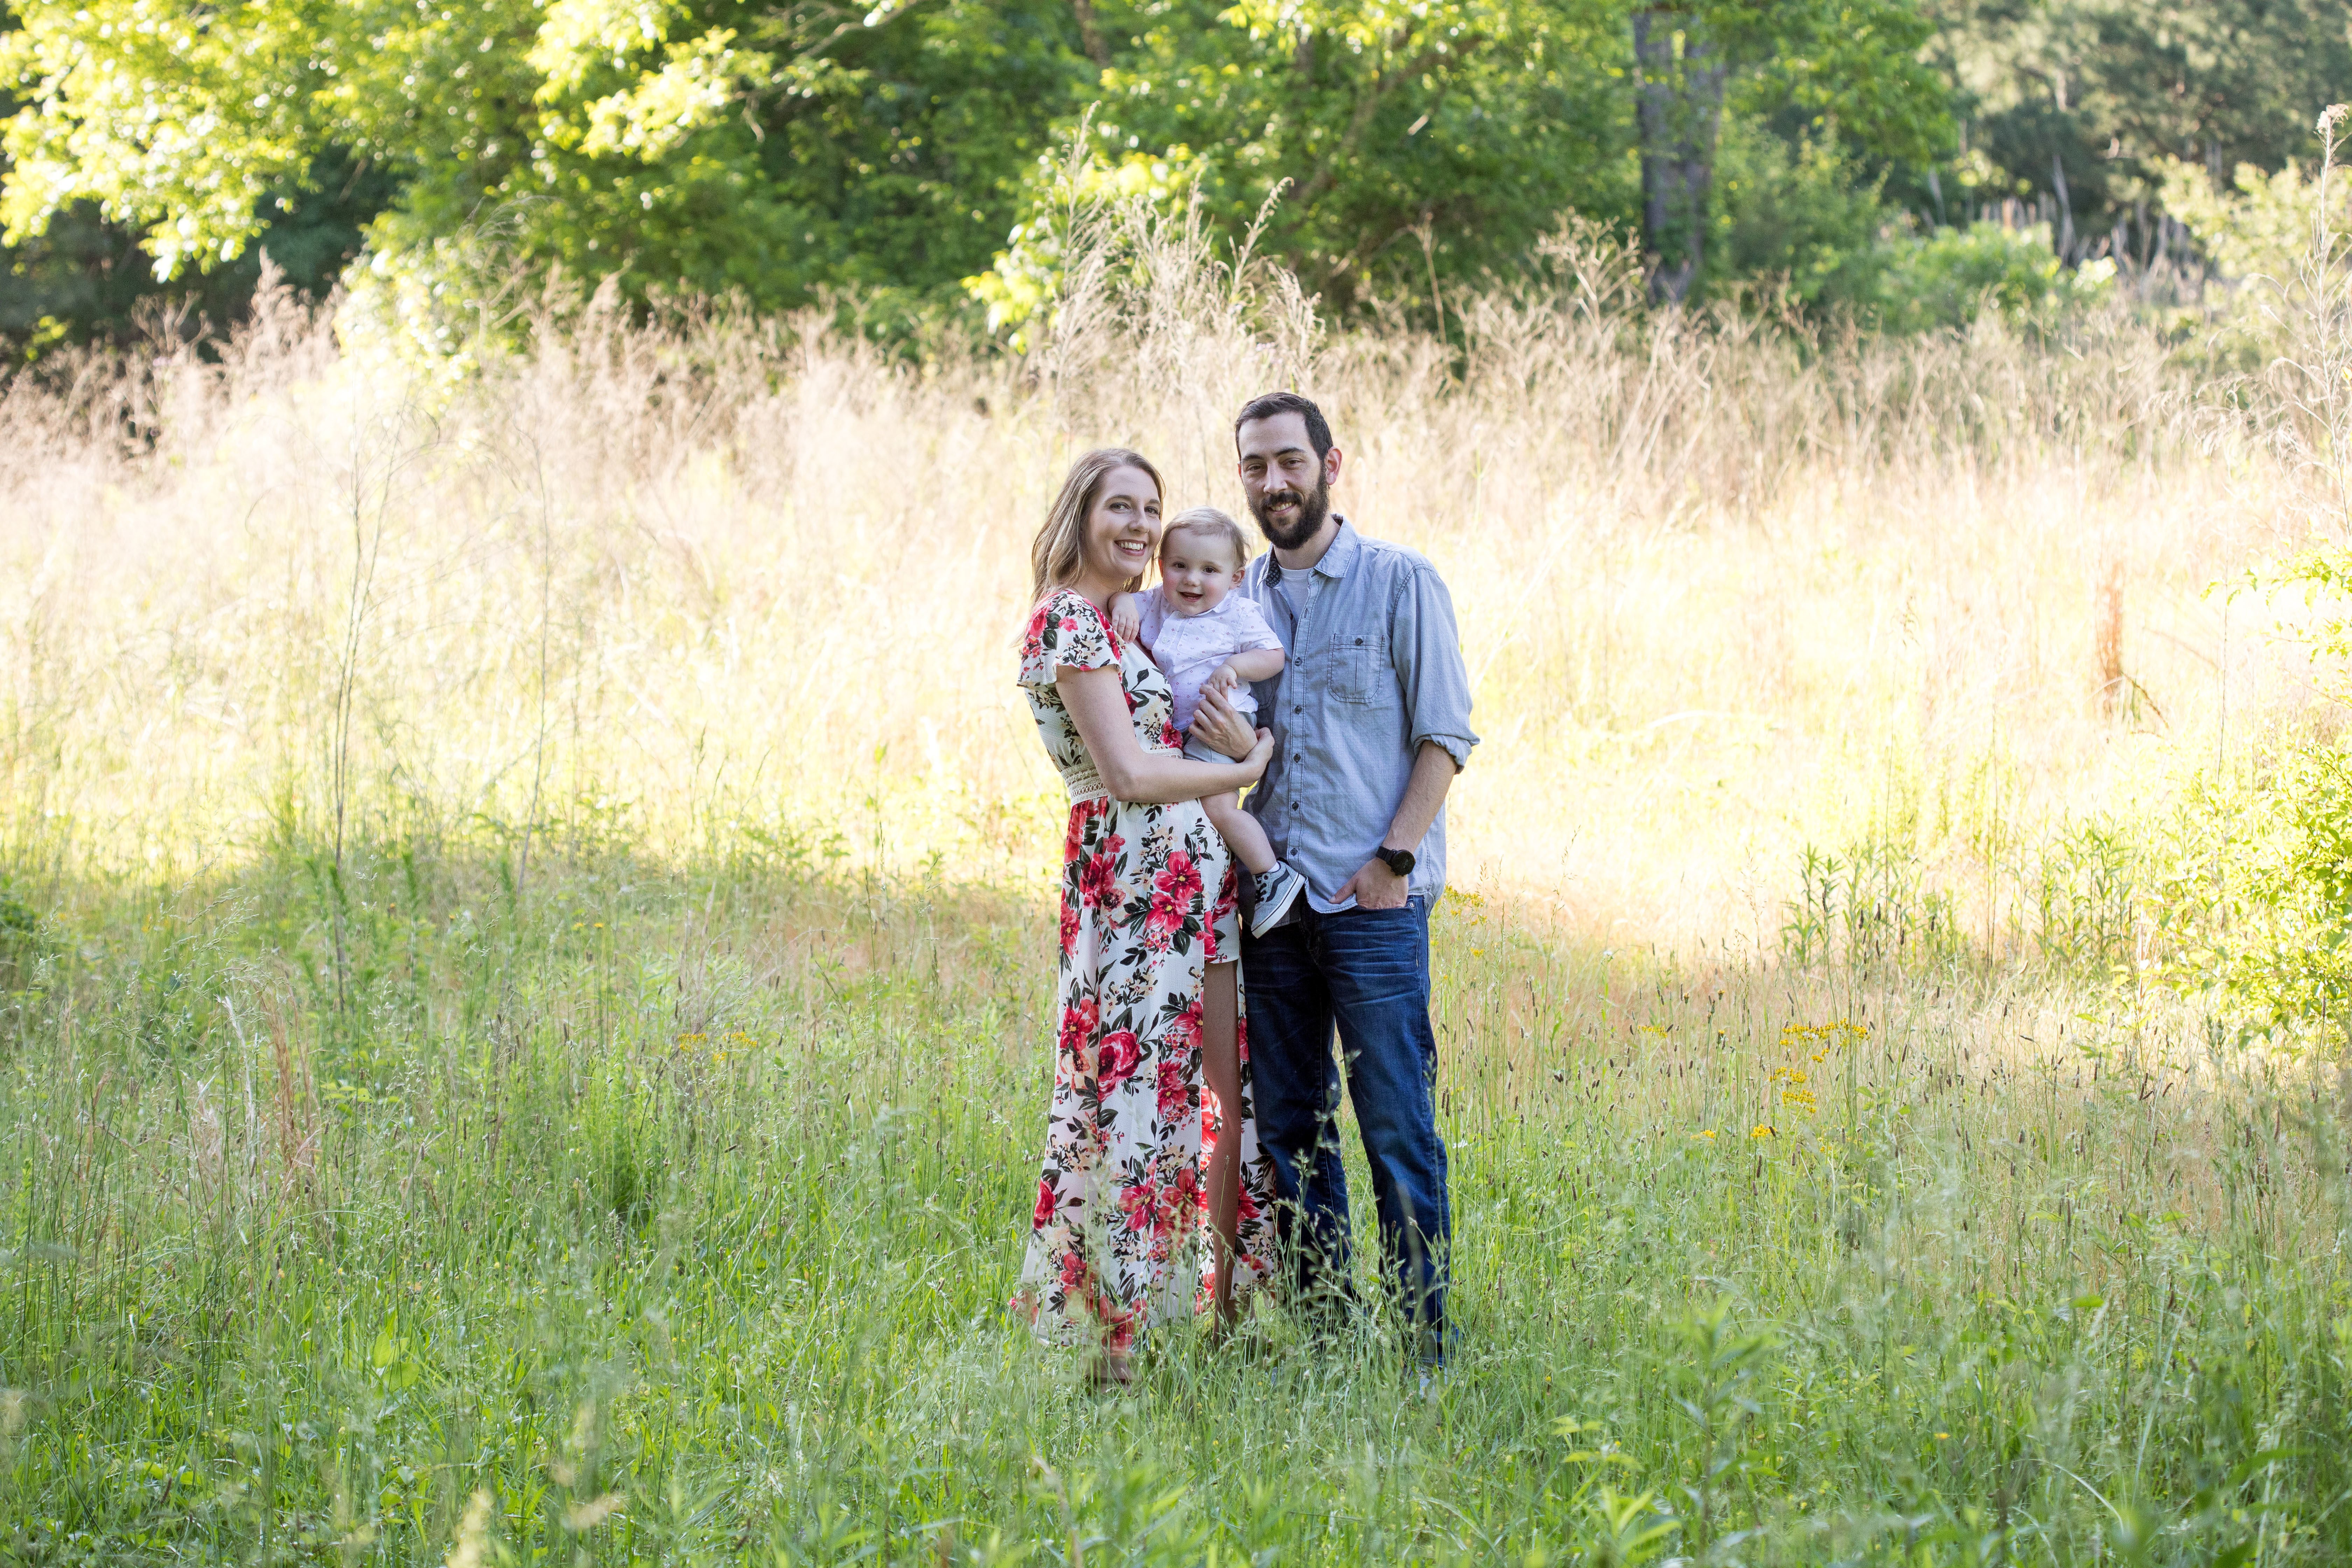 Family of three session at Vines Park in Loganville by A Focused Life Photography in Monroe GA